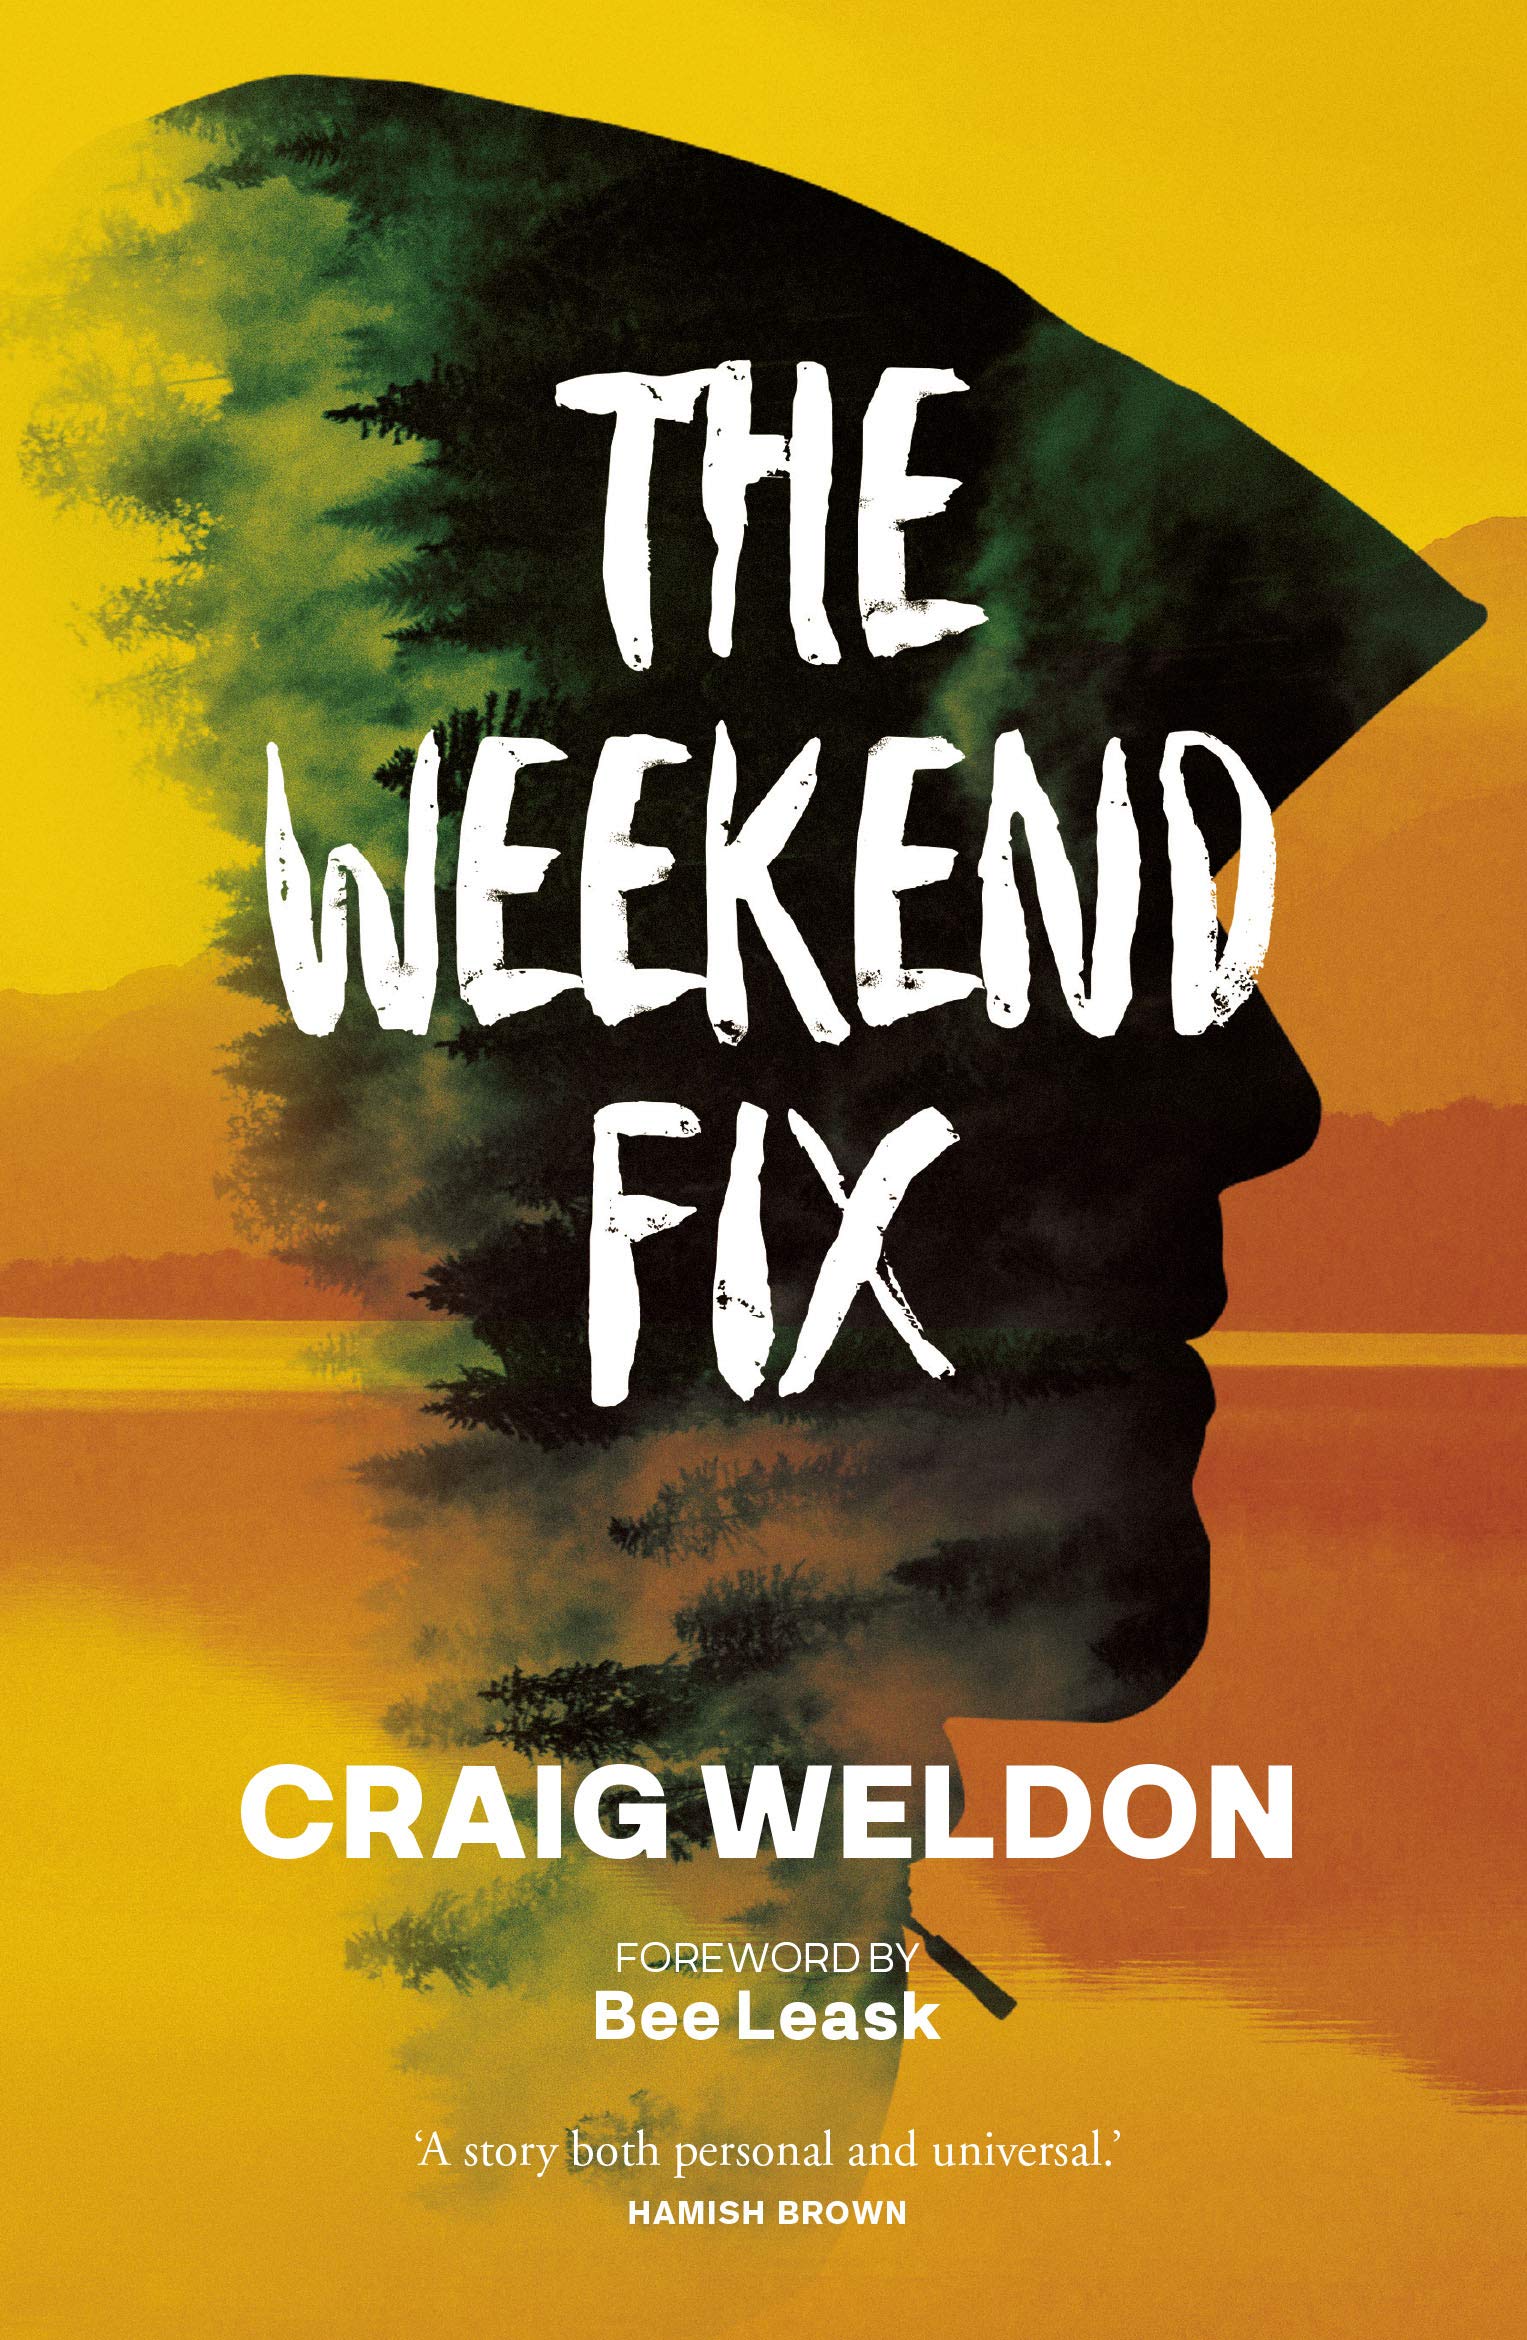 Book Cover: 'The Weekend Fix' written in text. Orange background with a silhouette of a face behind text.  